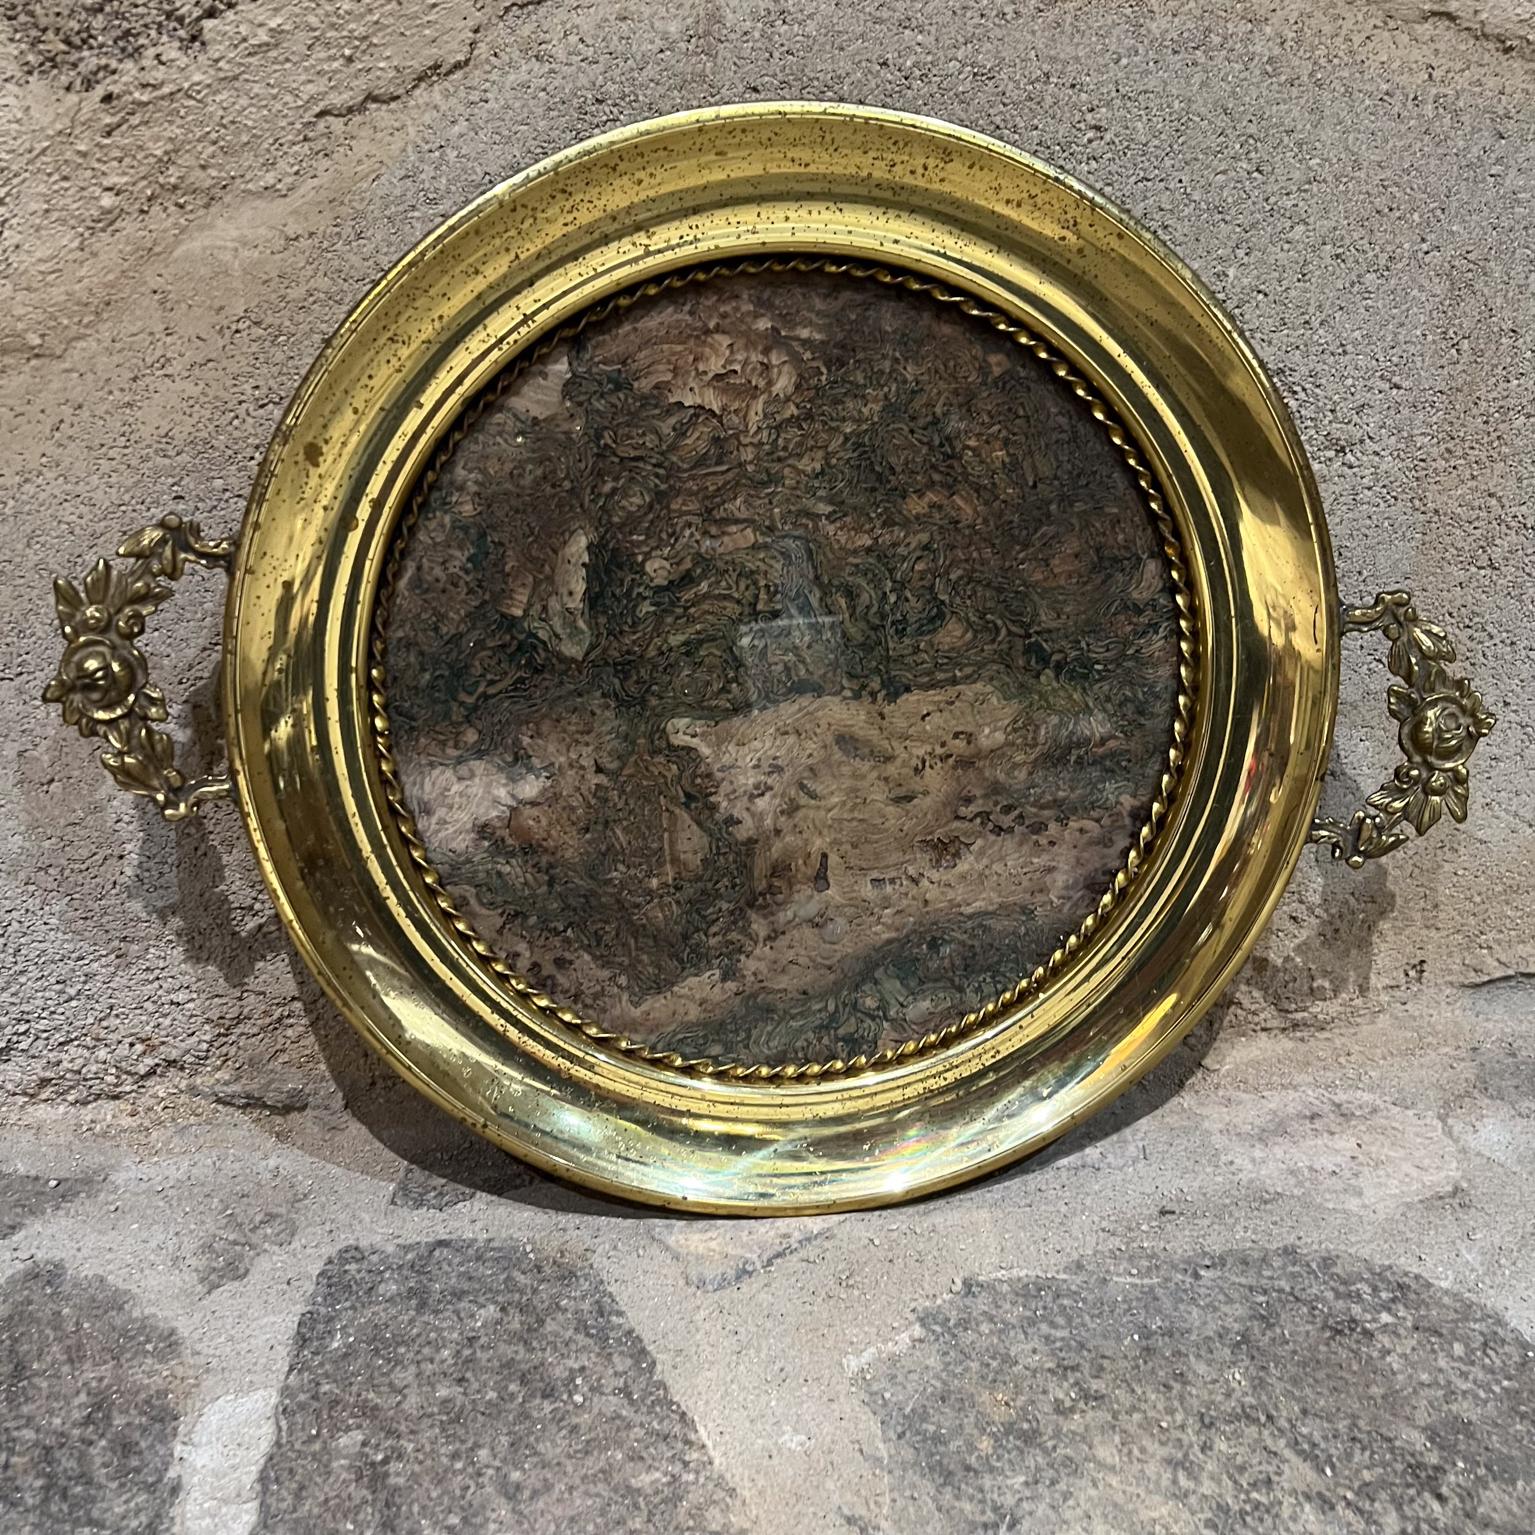 European Antique Service Tray Ornate Brass  For Sale 4